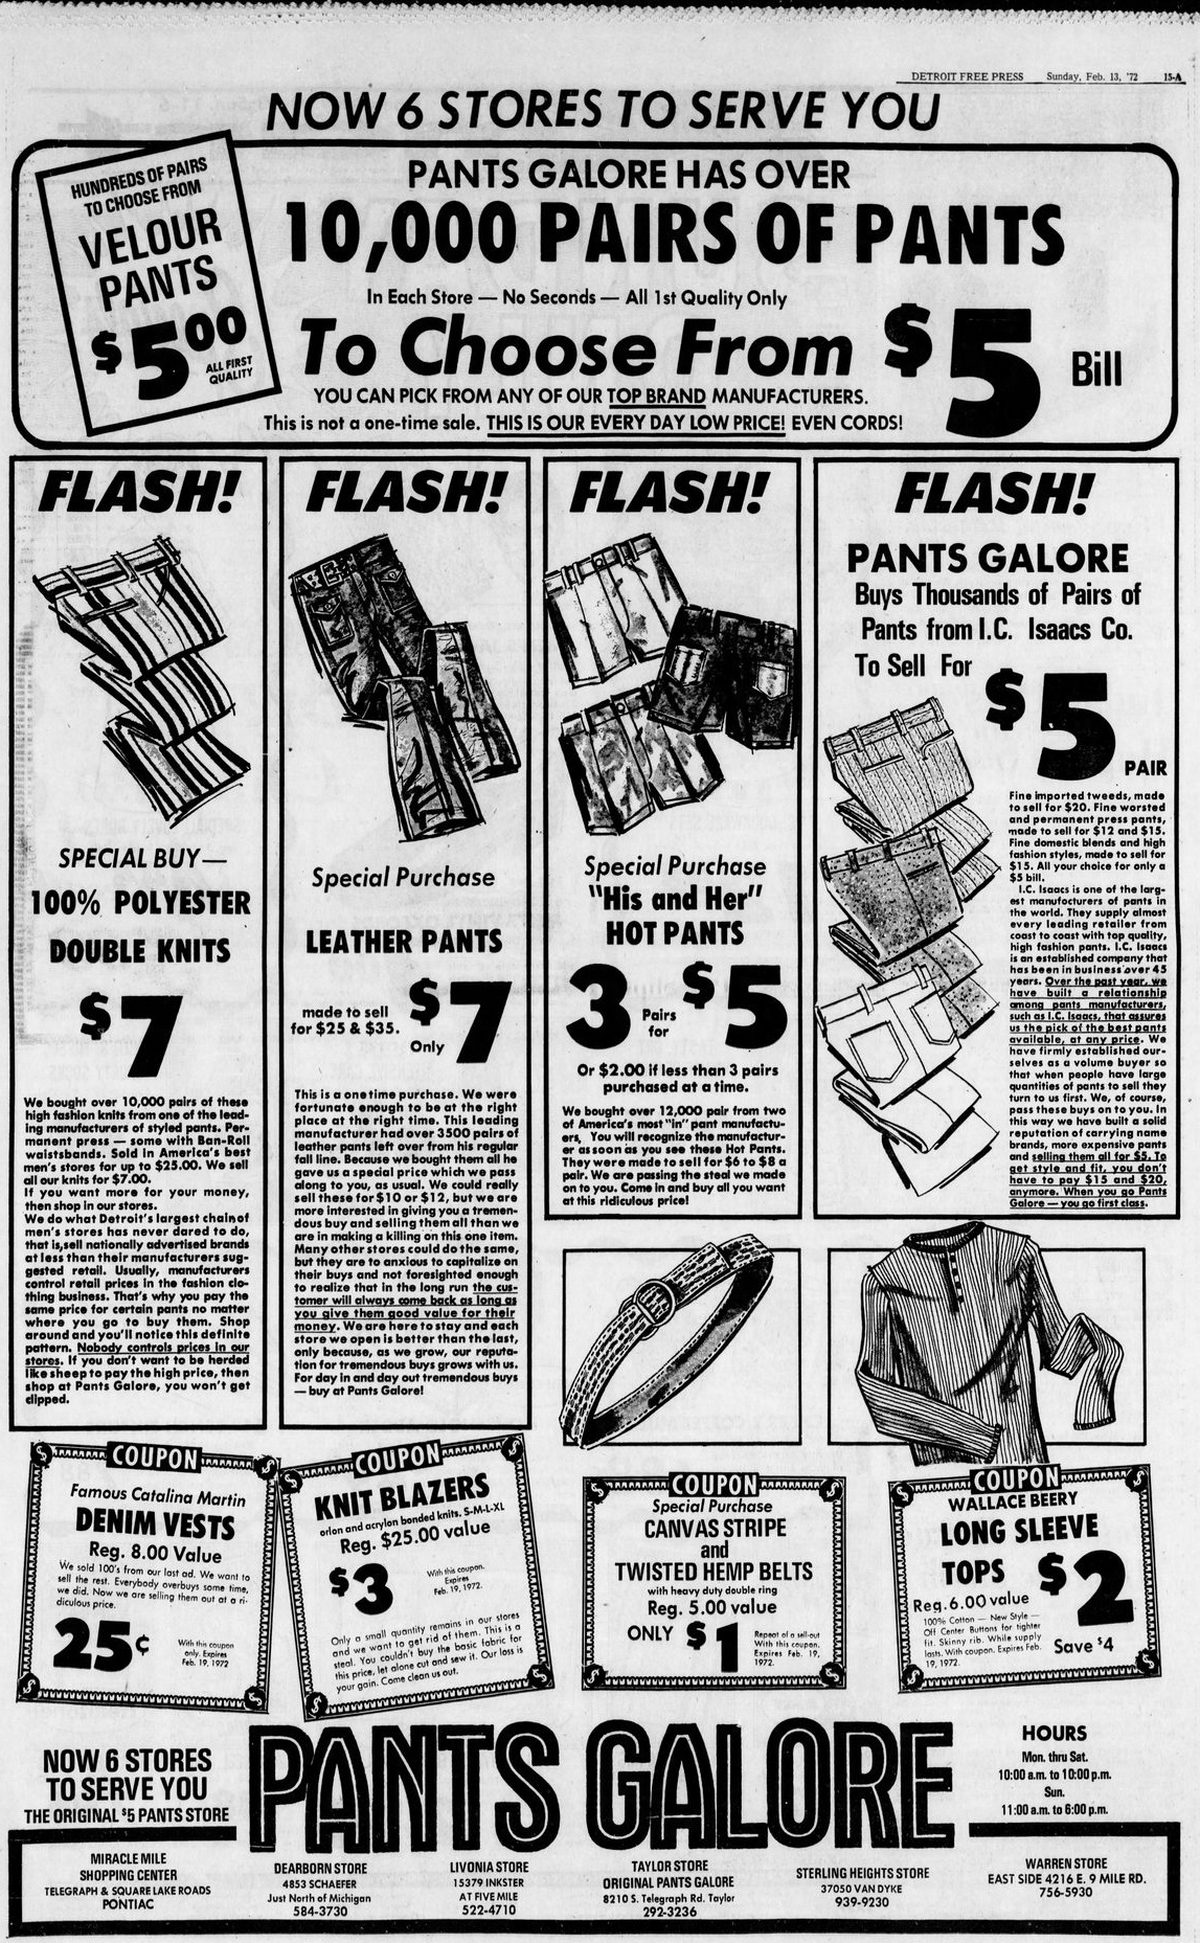 Pants Galore - Frb 1972 Full Page Ad With Store Locations (newer photo)